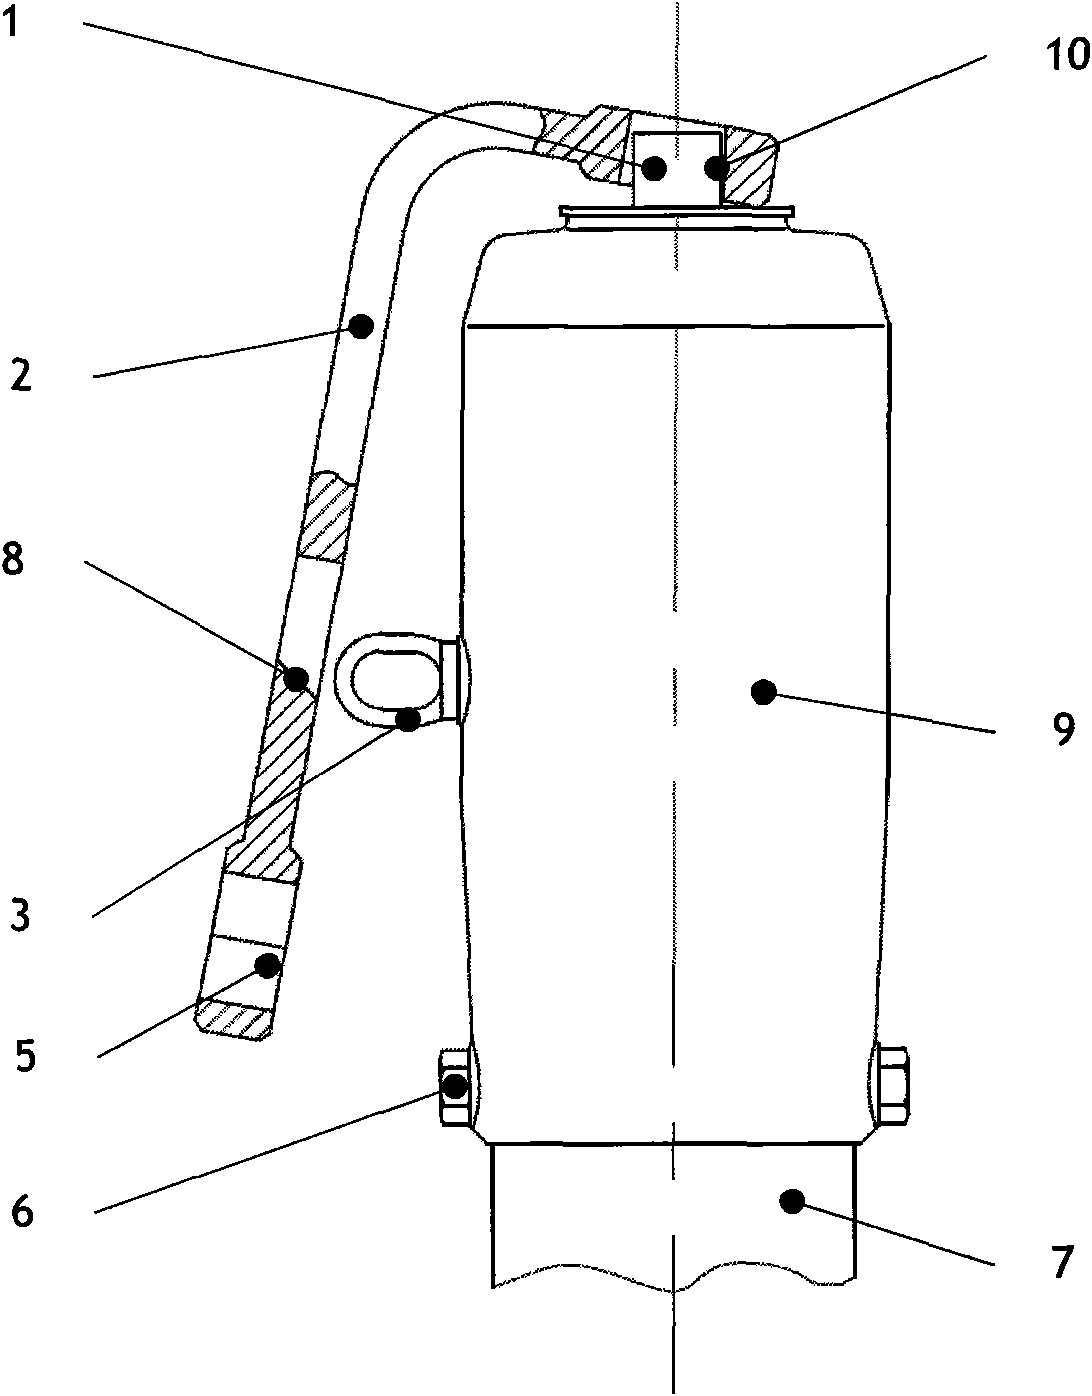 A safety lock control drive device